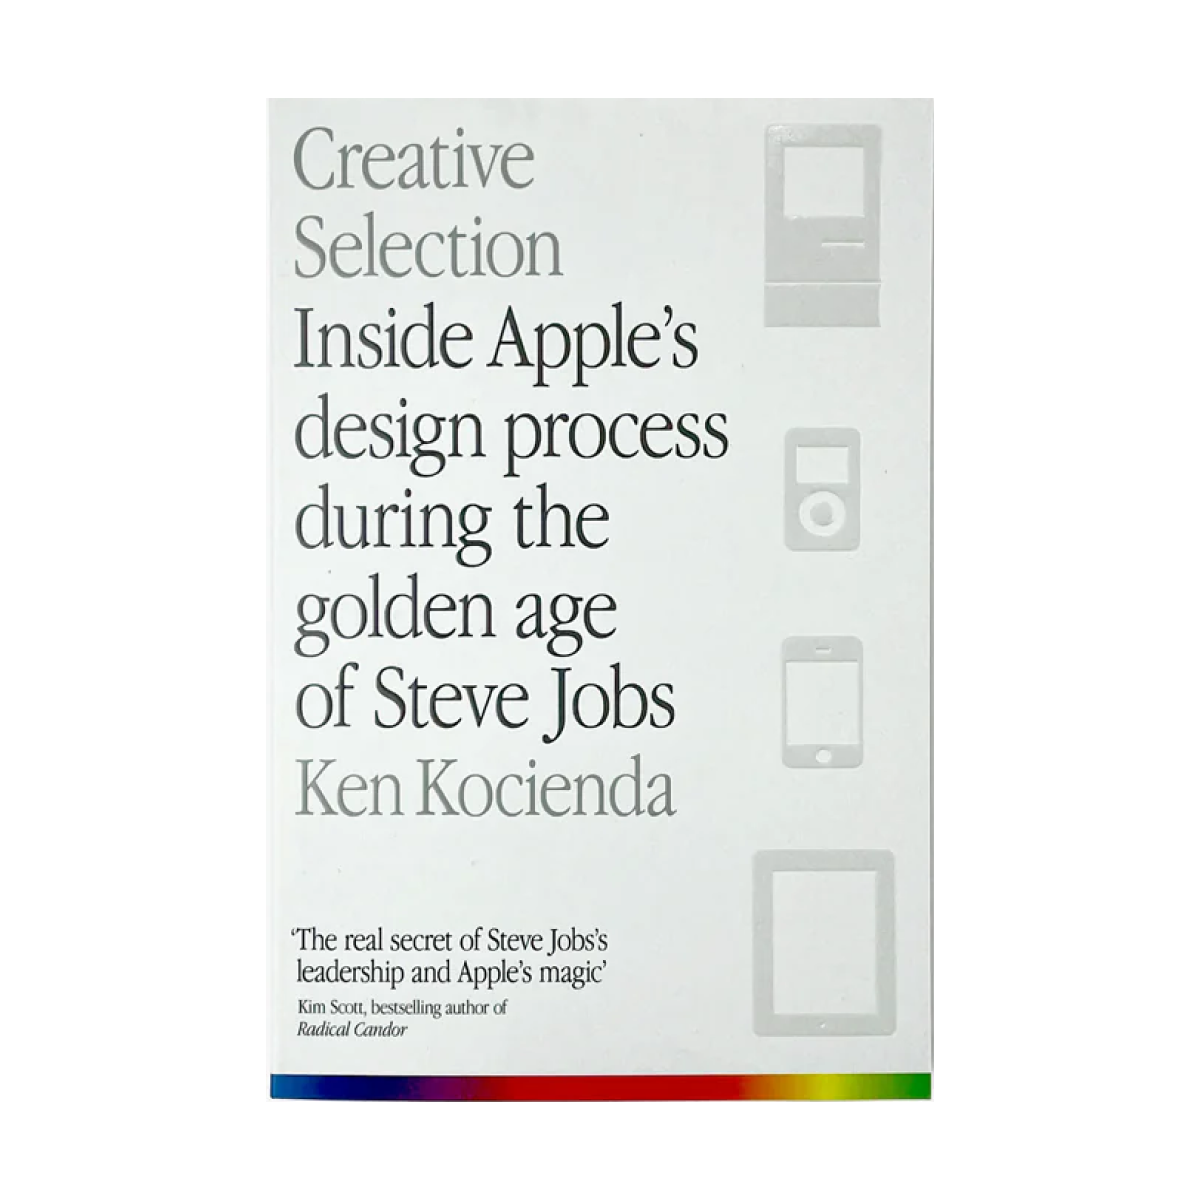 A book that talks about Apple's design during the golden age